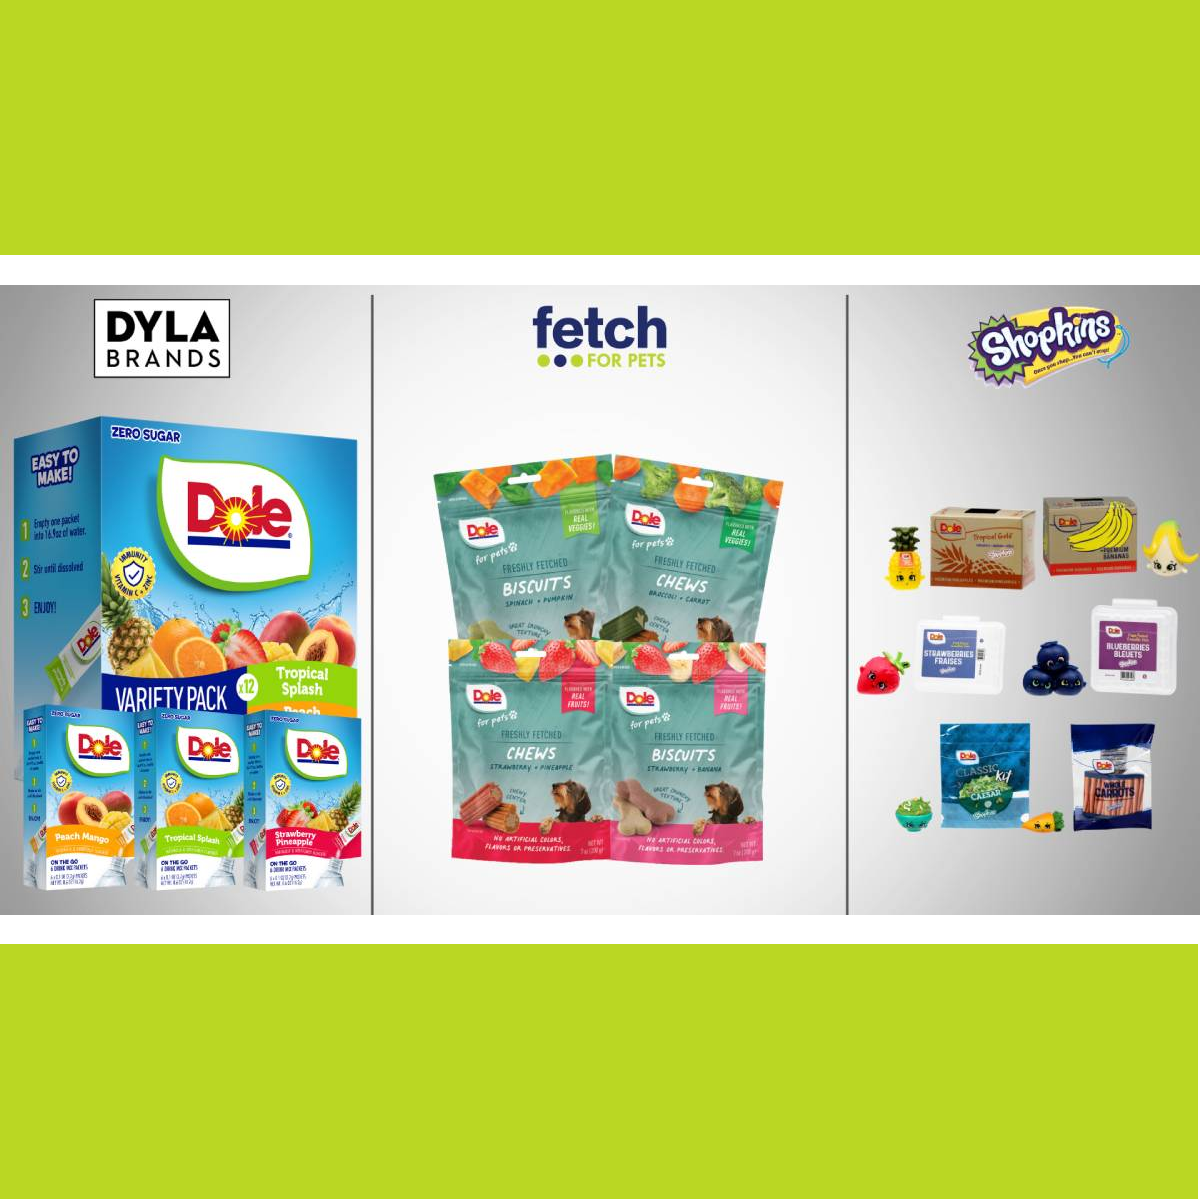 Dole Food Co. Selects Fresh Licensees to Grow Licensing Program